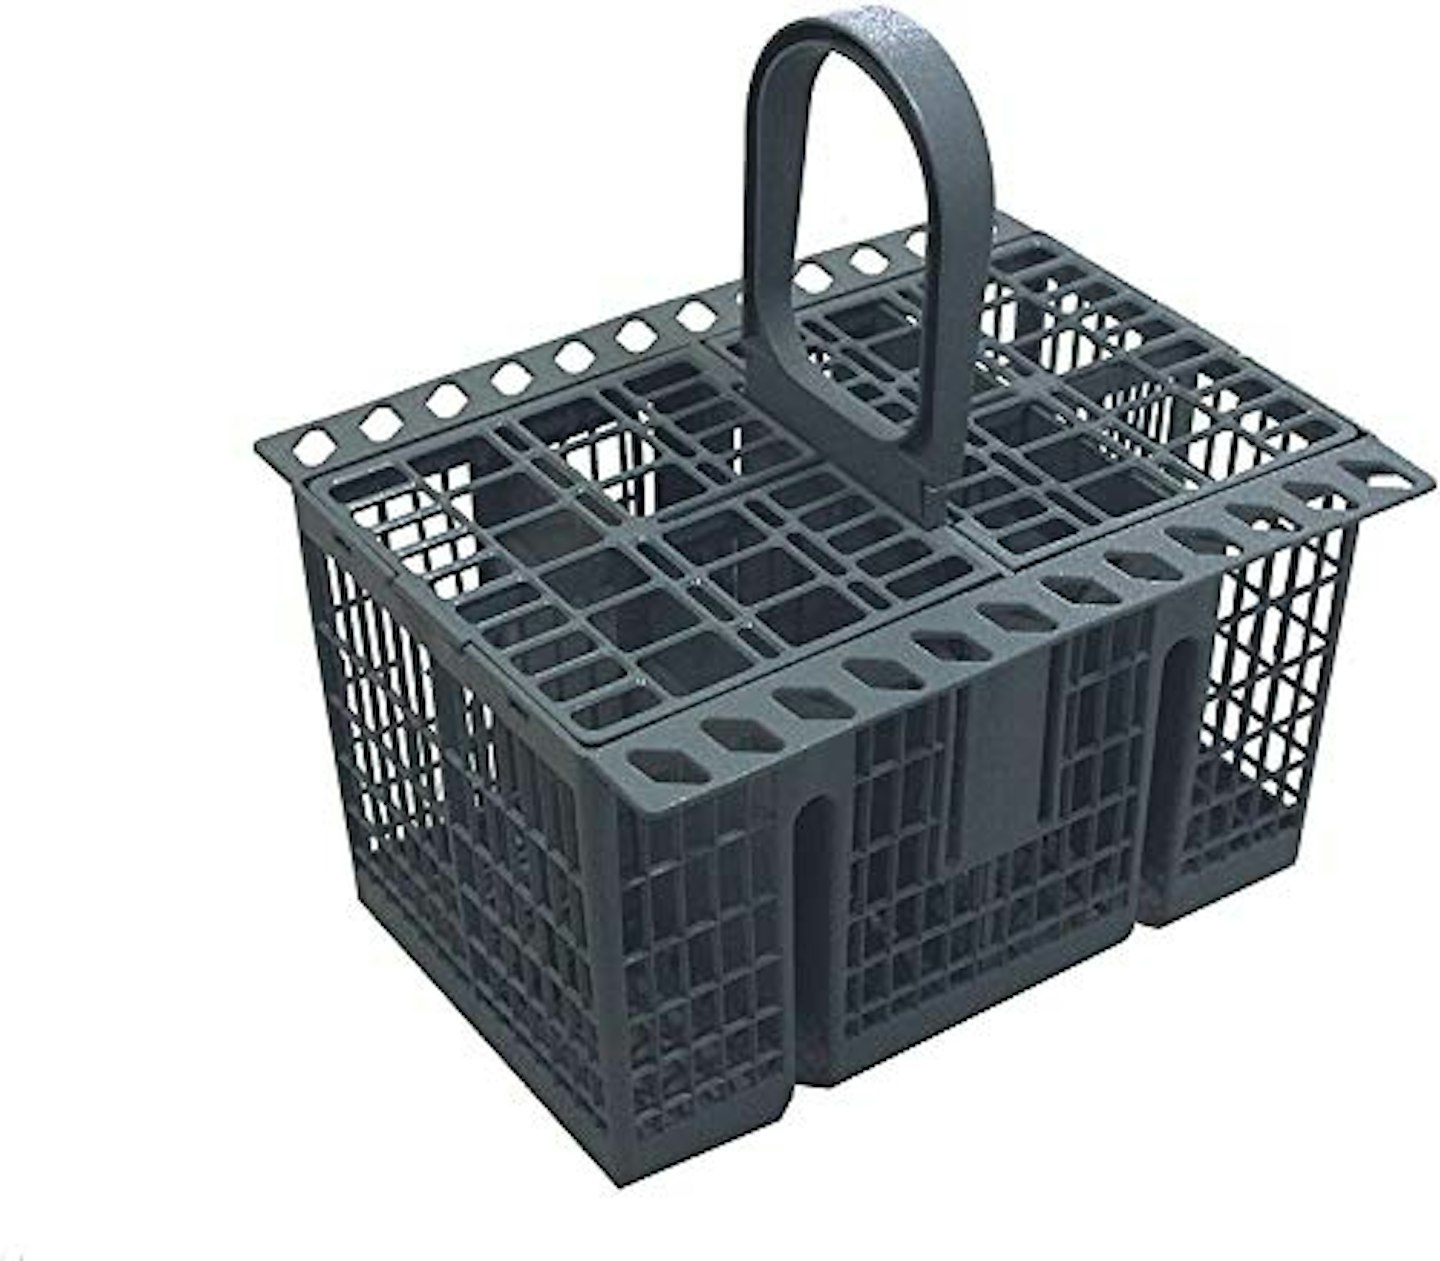 Dishwasher baskets for cleaning bottle parts and more